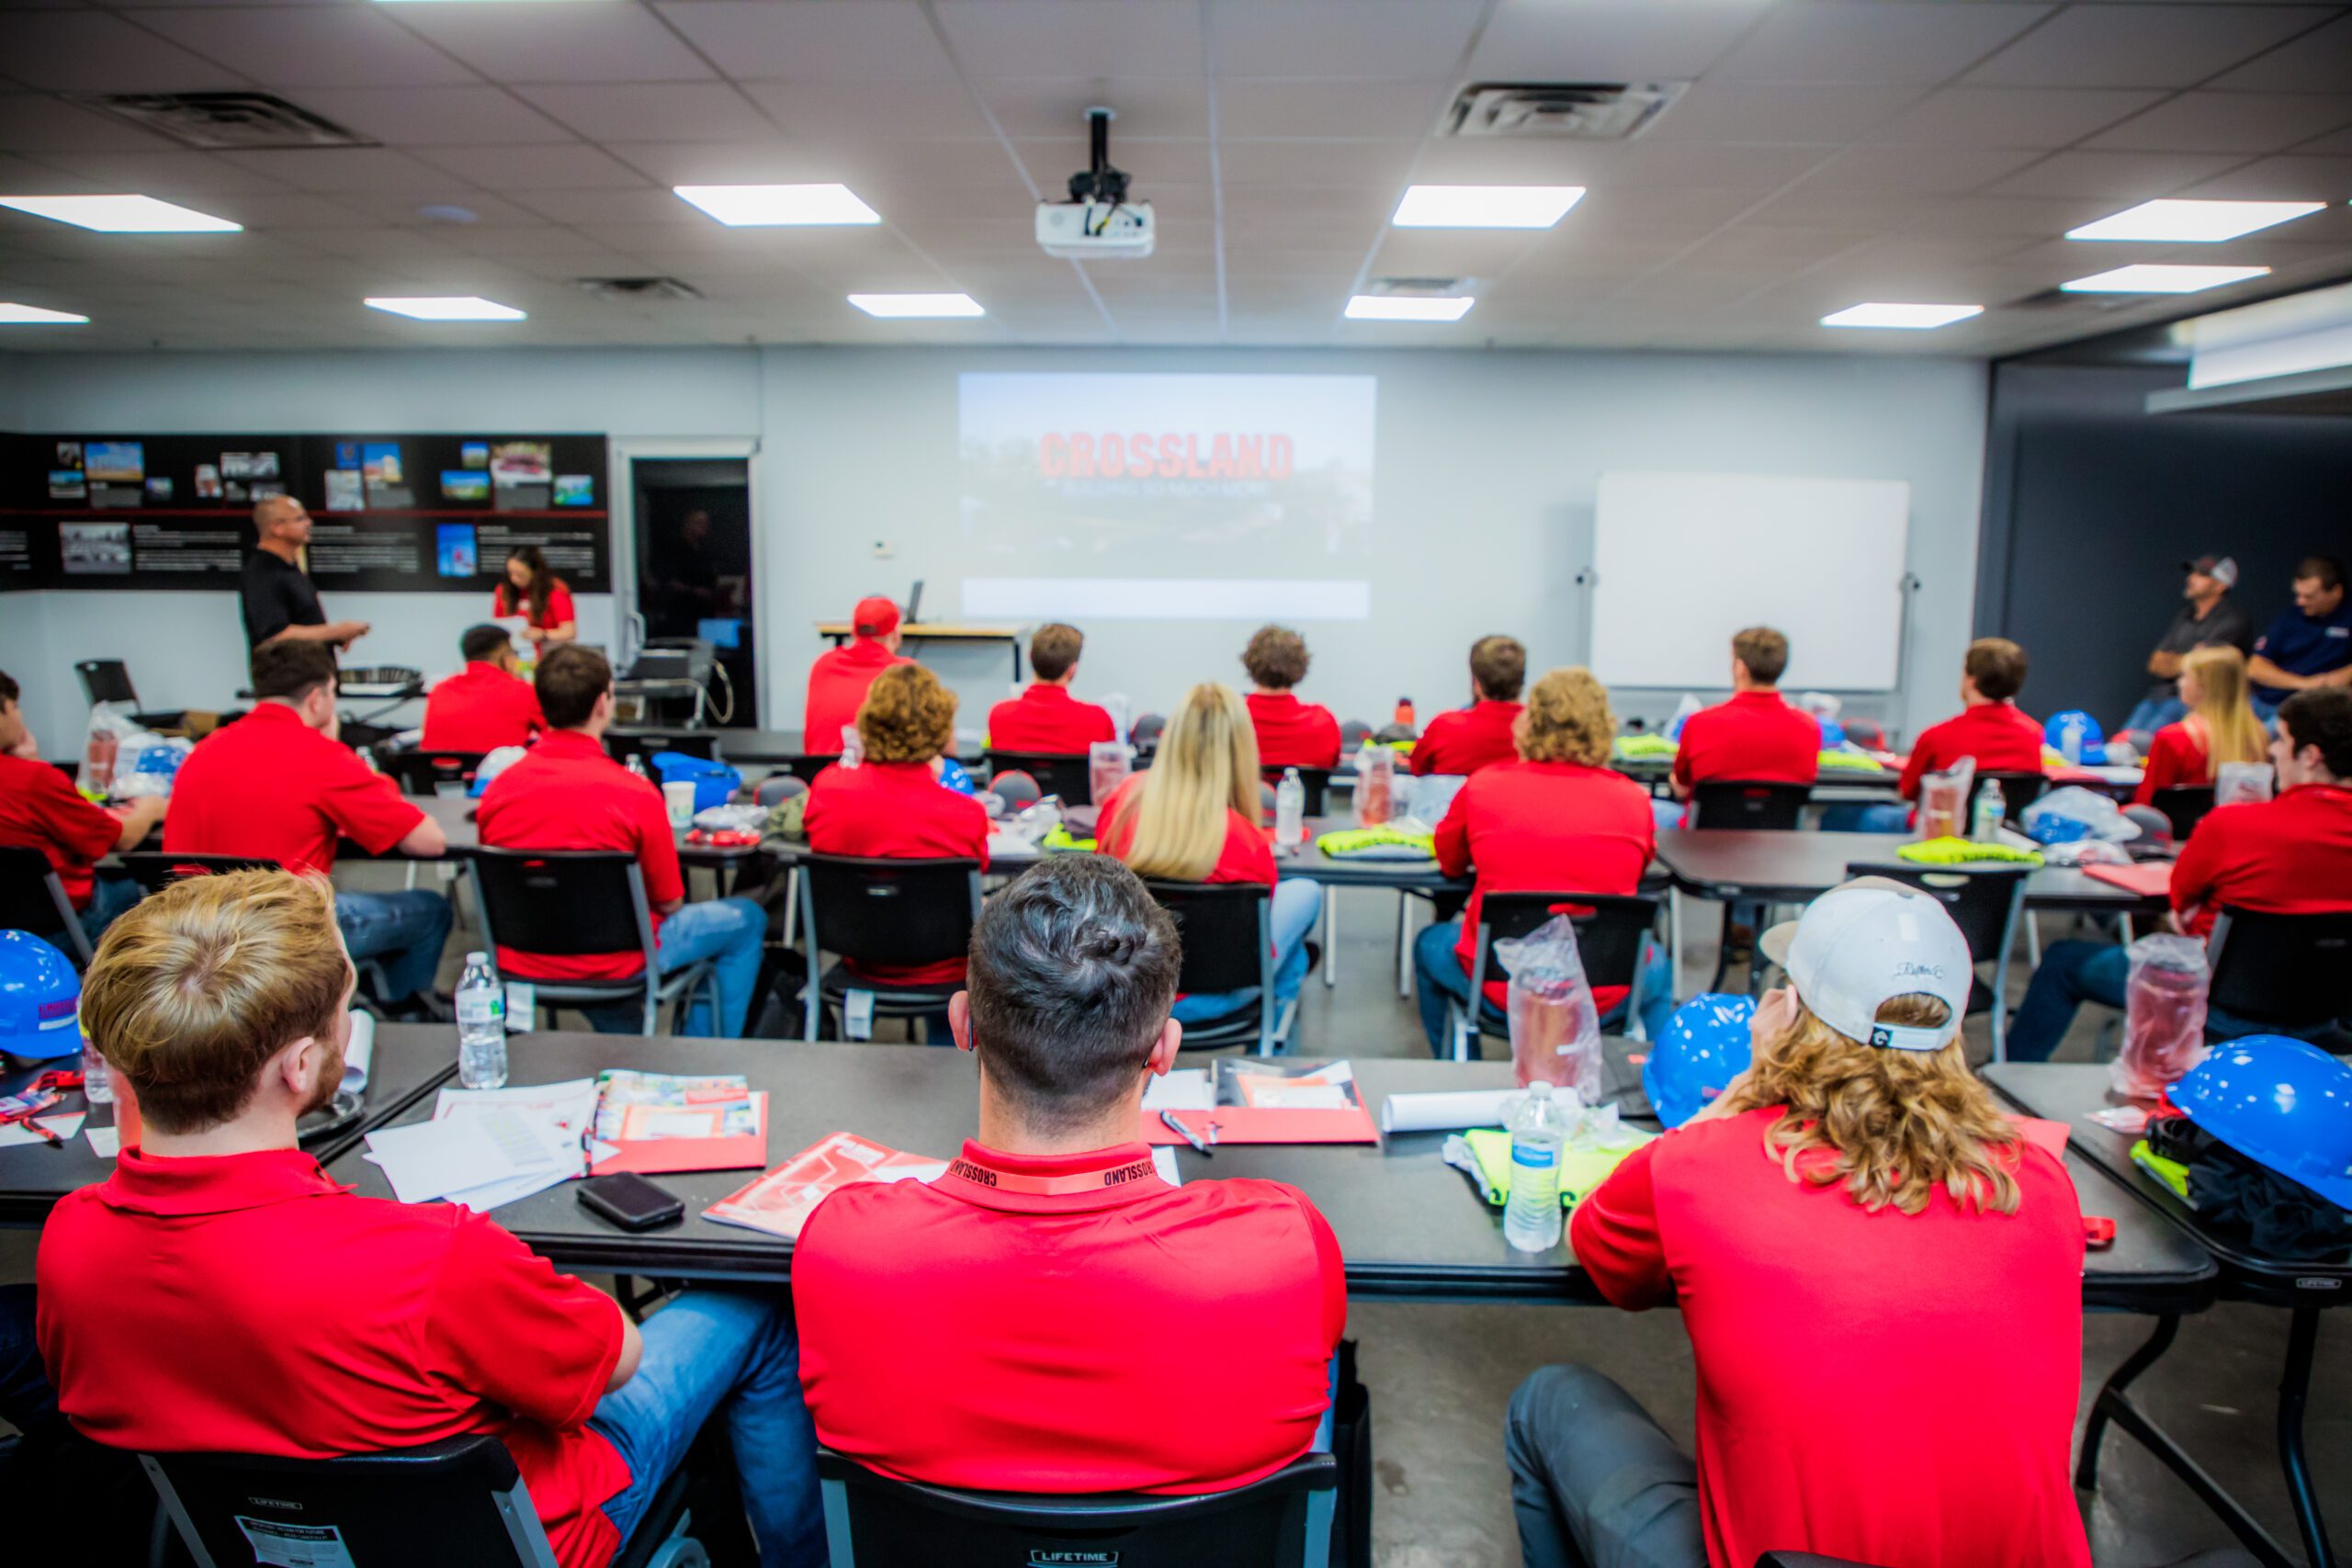 A group of people in red shirts in a classroom.